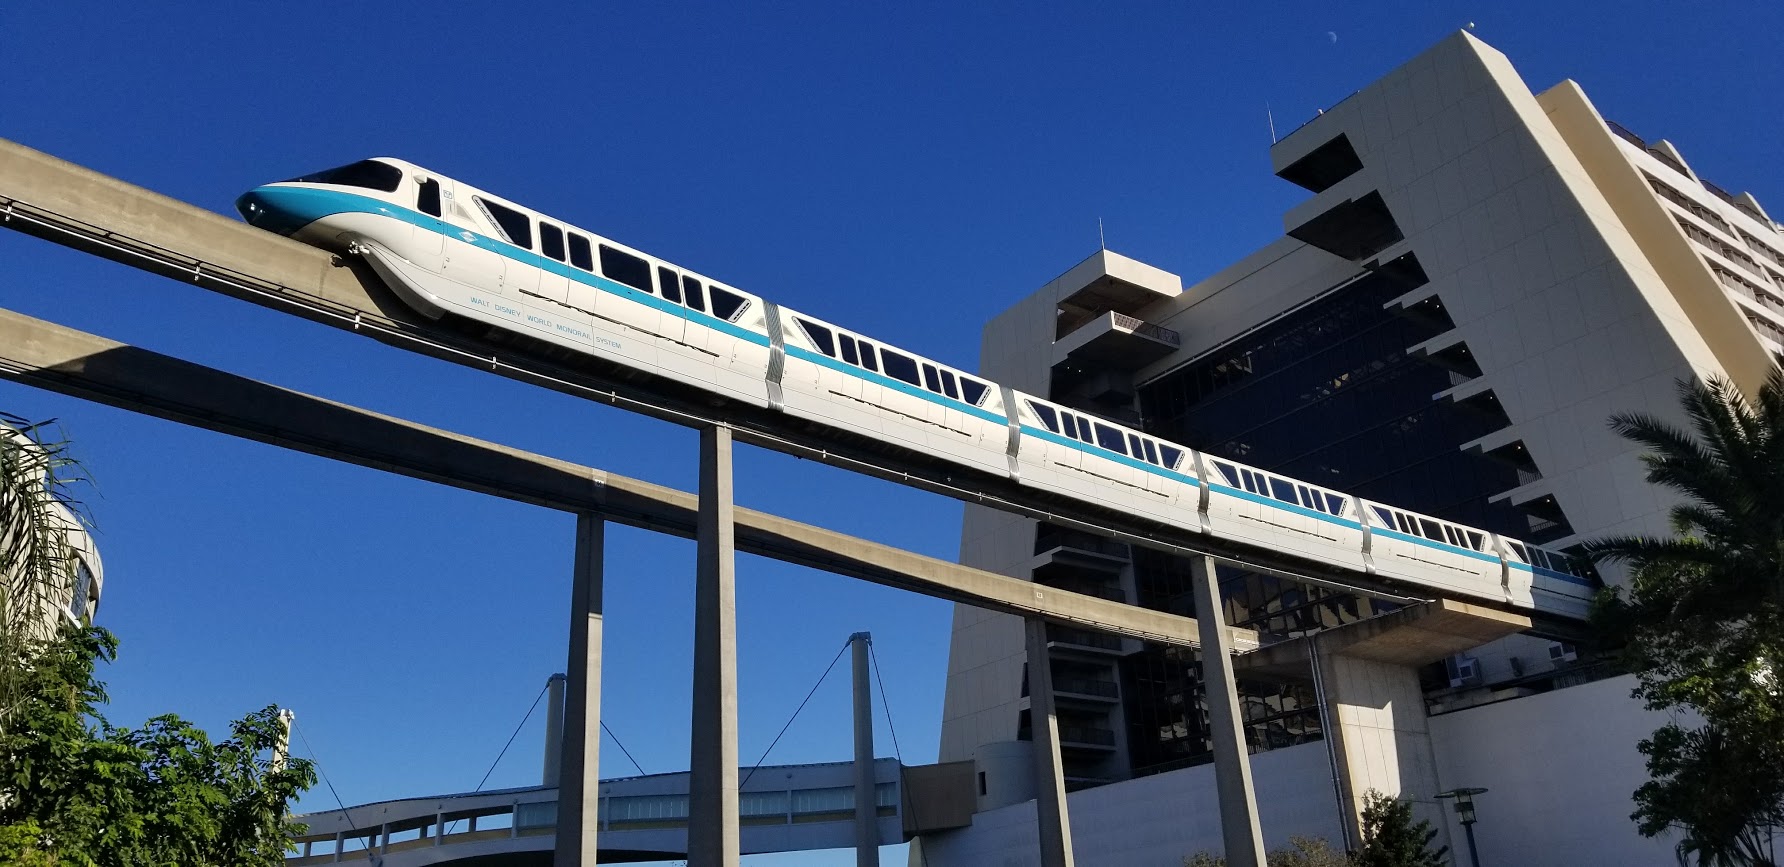 Guests evacuated from broken-down Disney monorail Thursday night